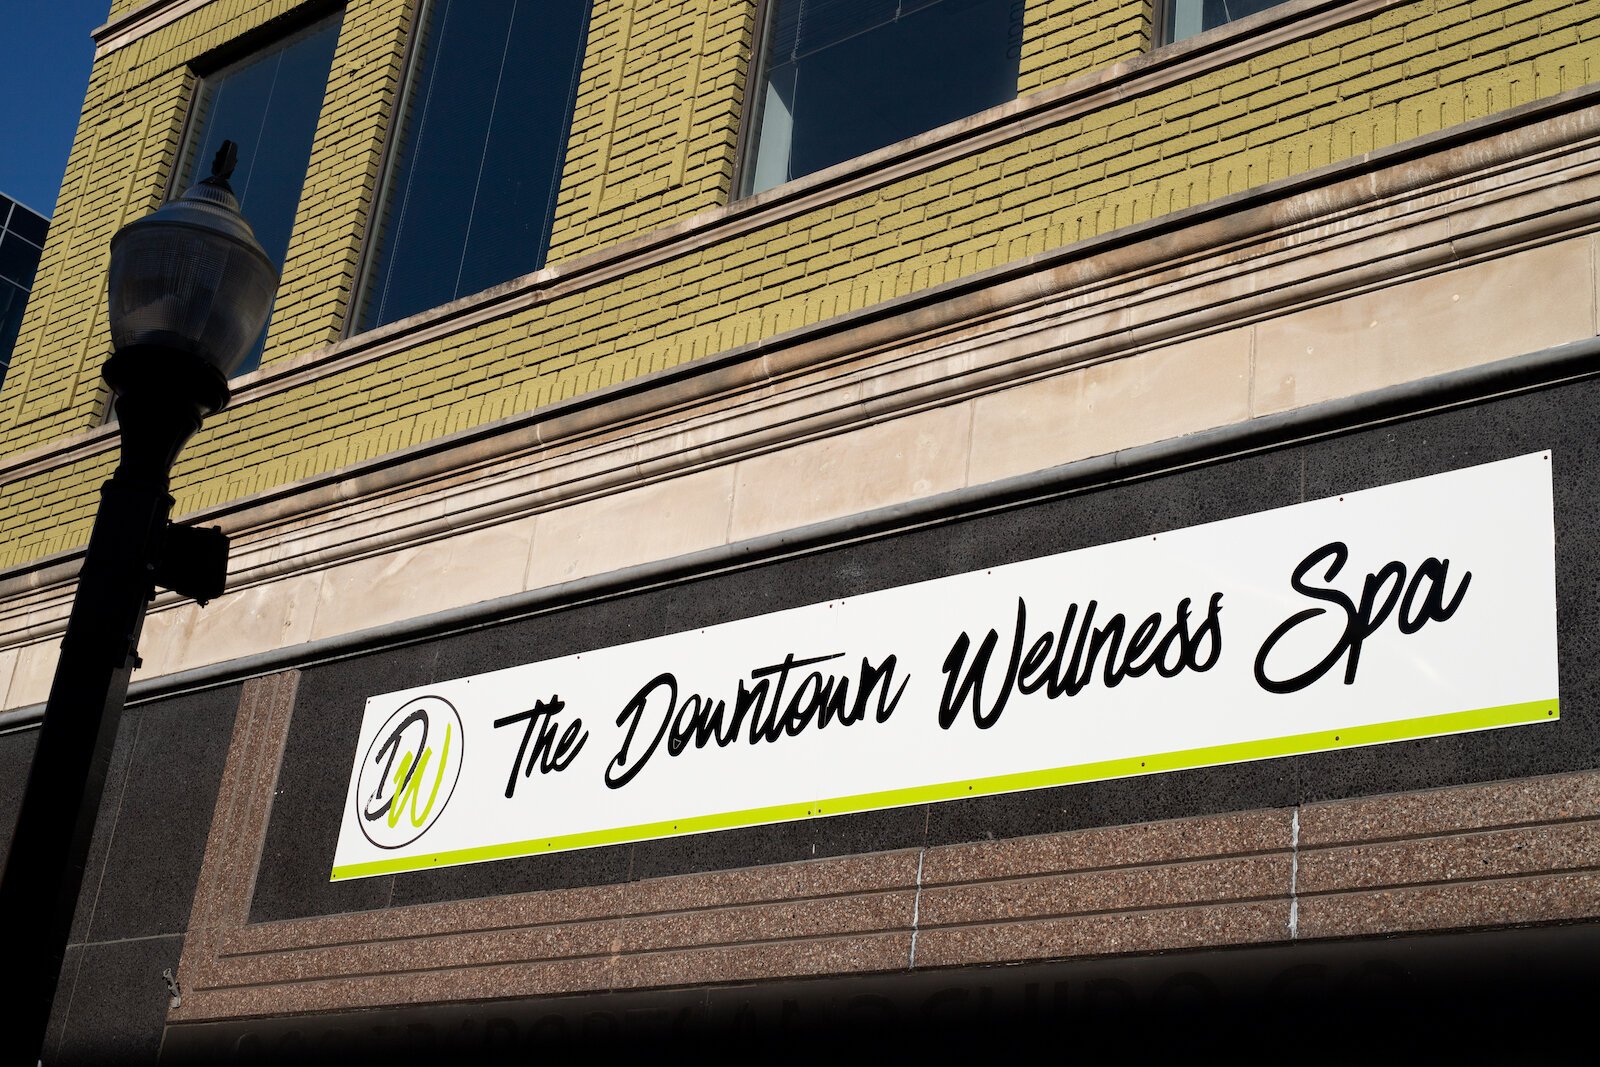 The Downtown Wellness Spa is located at 122 W Wayne St.